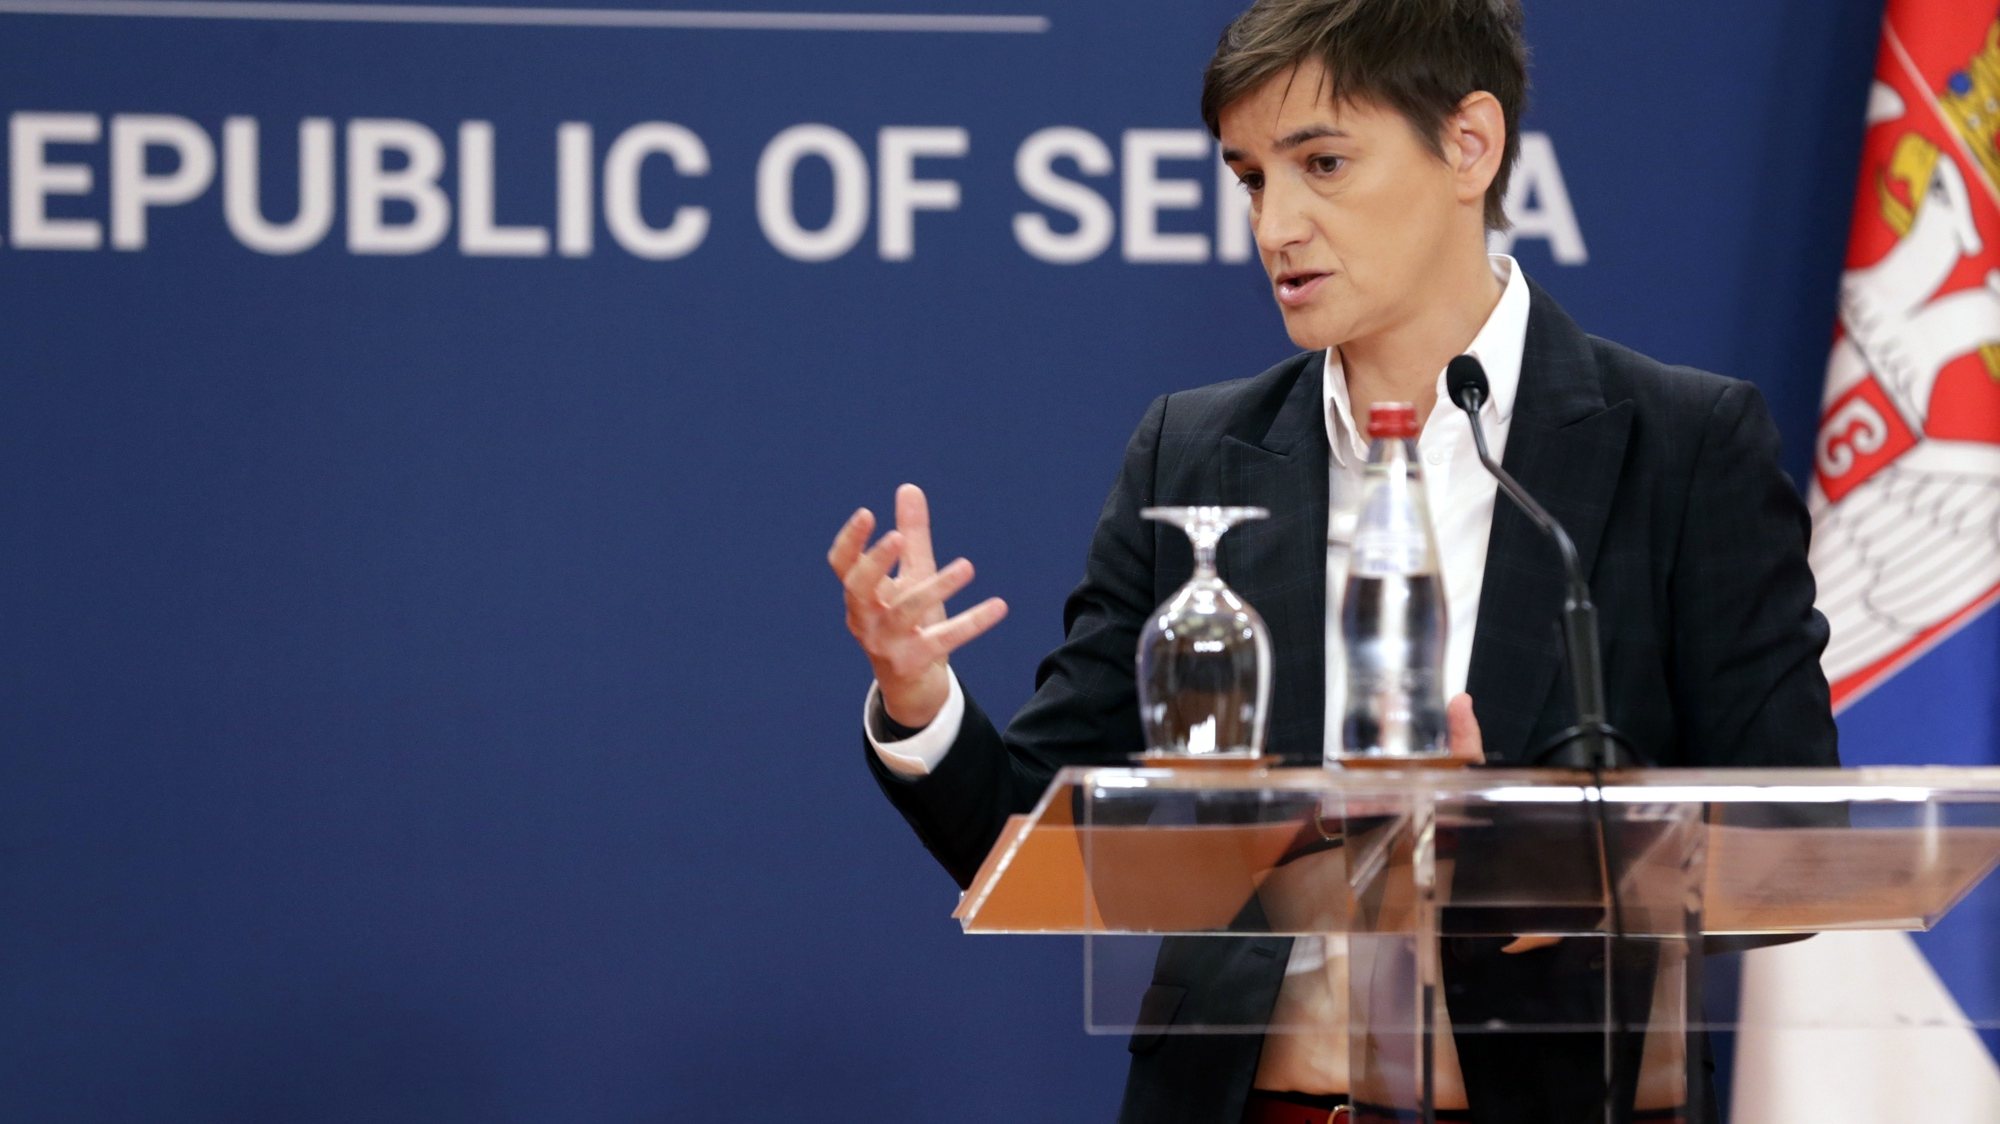 epa10040647 Serbian Prime Minister Ana Brnabic speaks during a press conference with her Montenegrin counterpart Abazovic in Belgrade, Serbia, 29 June 2022. Abazovic is on an official state visit to Serbia.  EPA/ANDREJ CUKIC